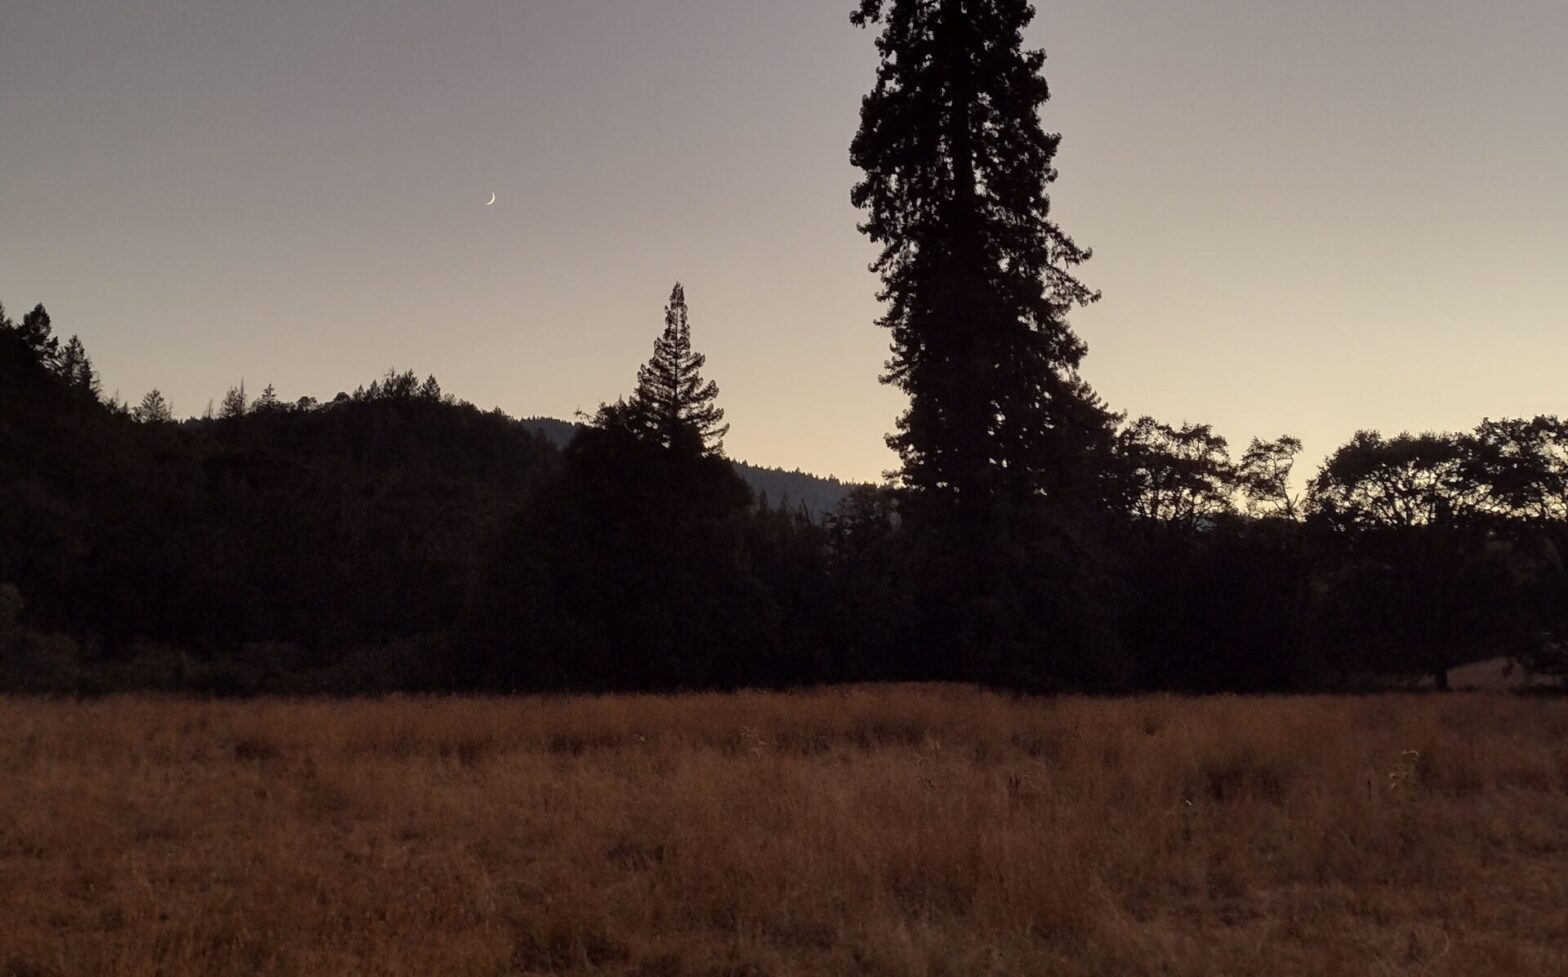 Evening view of a tall redwood tree above a grassy field